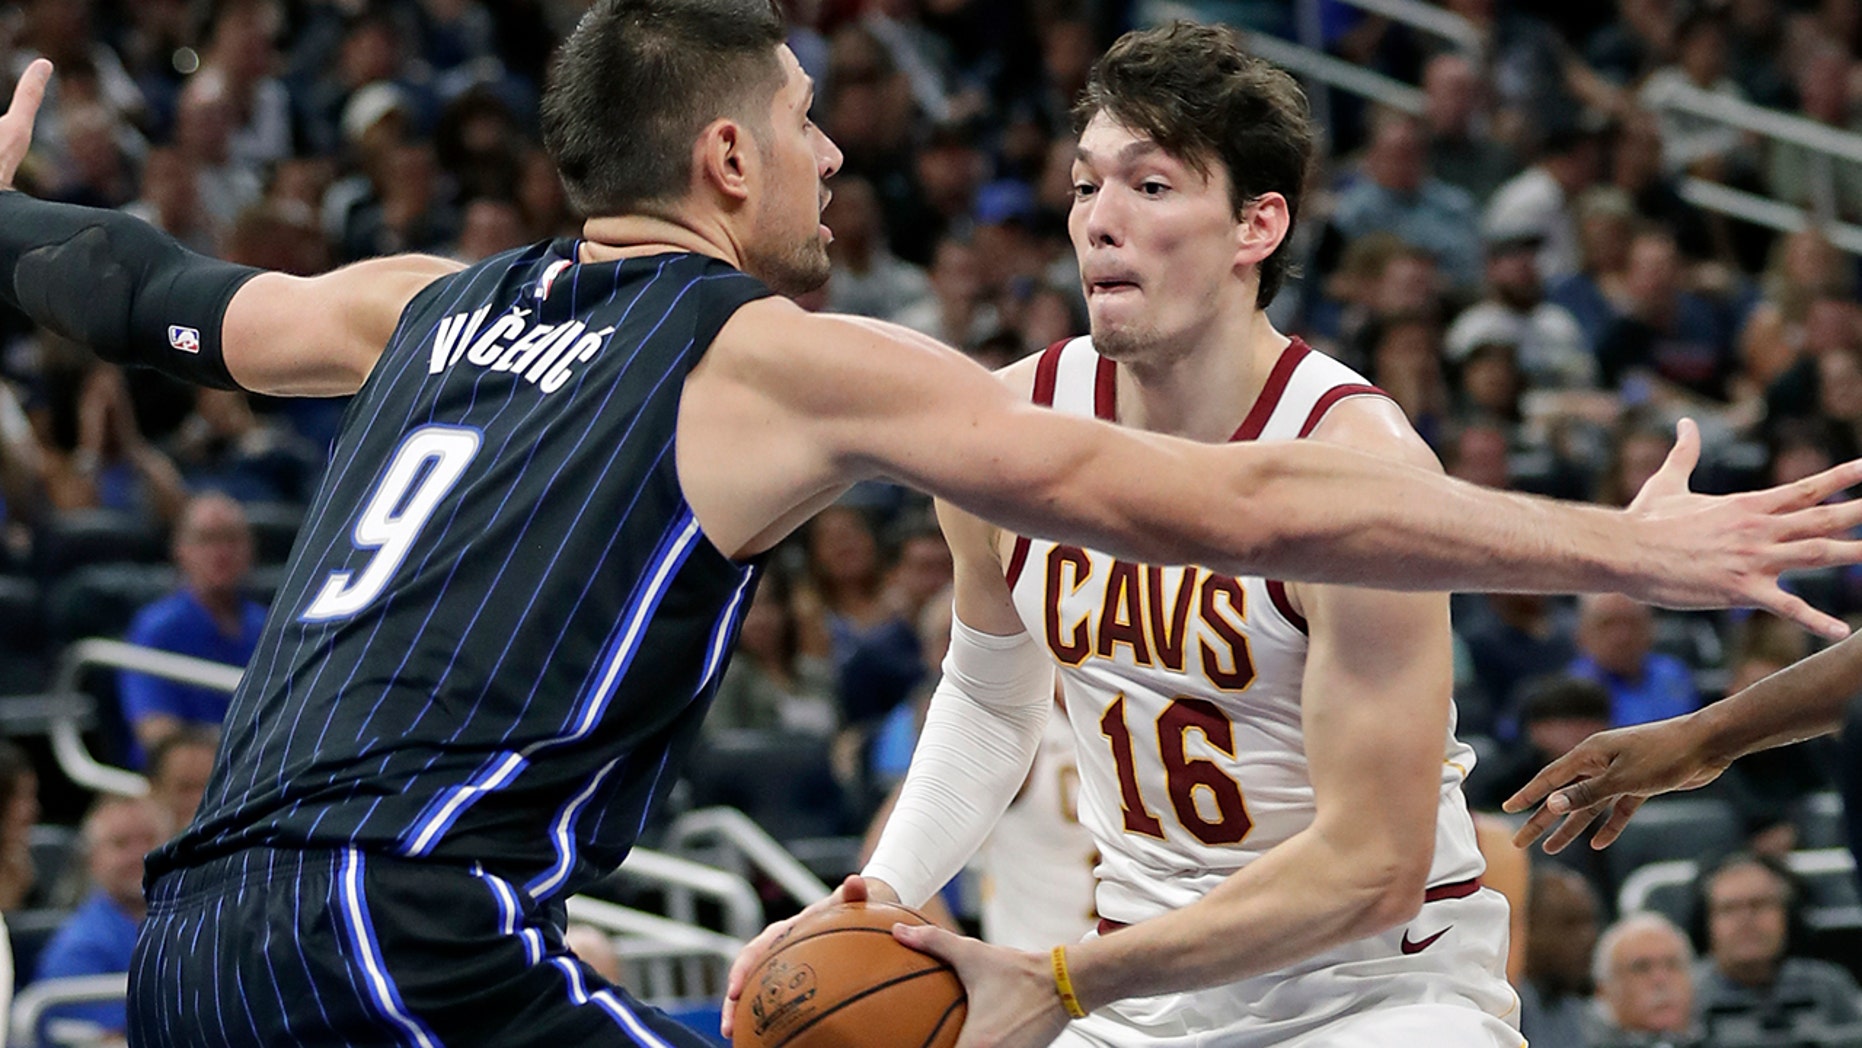 Cleveland Cavaliers forward Cedi Osman (16) looks for a way around Orlando Magic's Nikola Vucevic (9) during the second half of an NBA basketball game Wednesday, Oct. 23, 2019, in Orlando, Fla. (AP Photo/John Raoux)